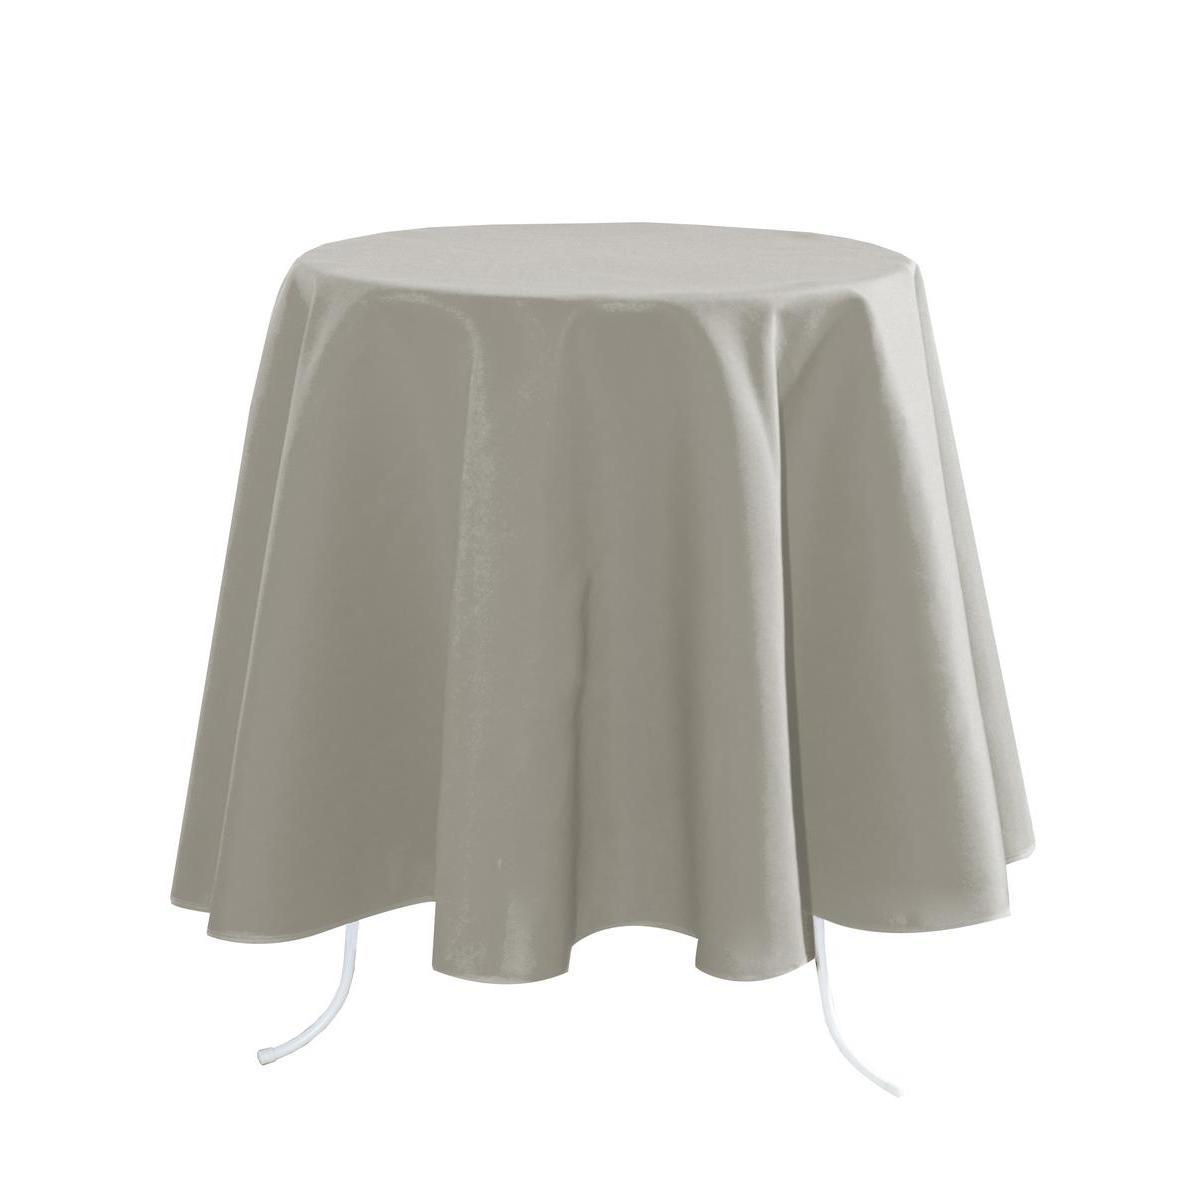 Nappe rectangulaire - 100 % Polyester - 148 x 300 cm - Beige